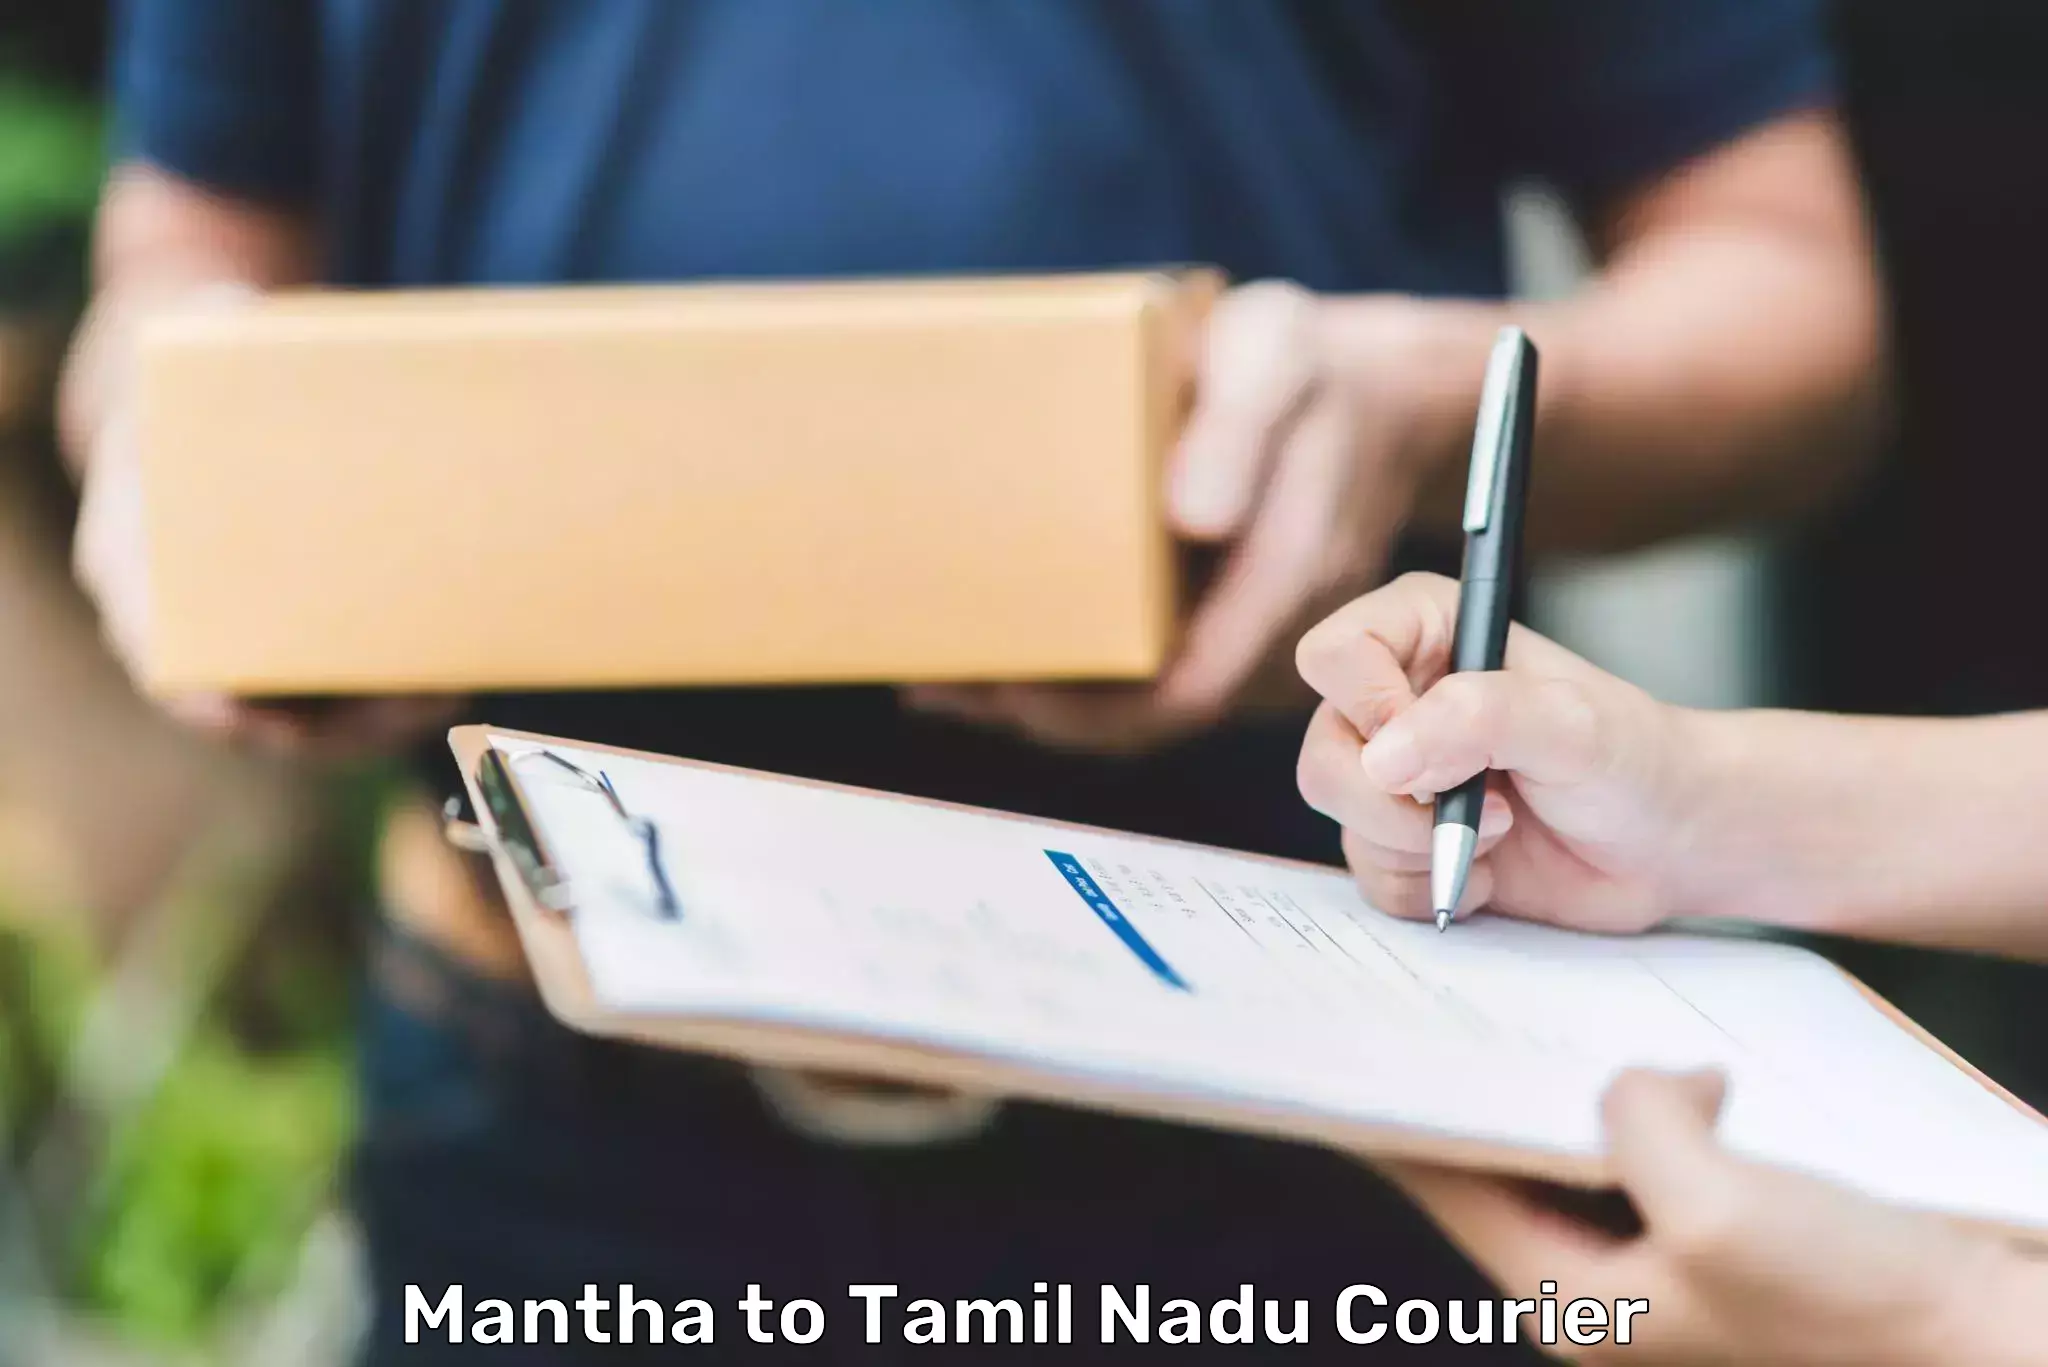 Local delivery service Mantha to Tamil Nadu